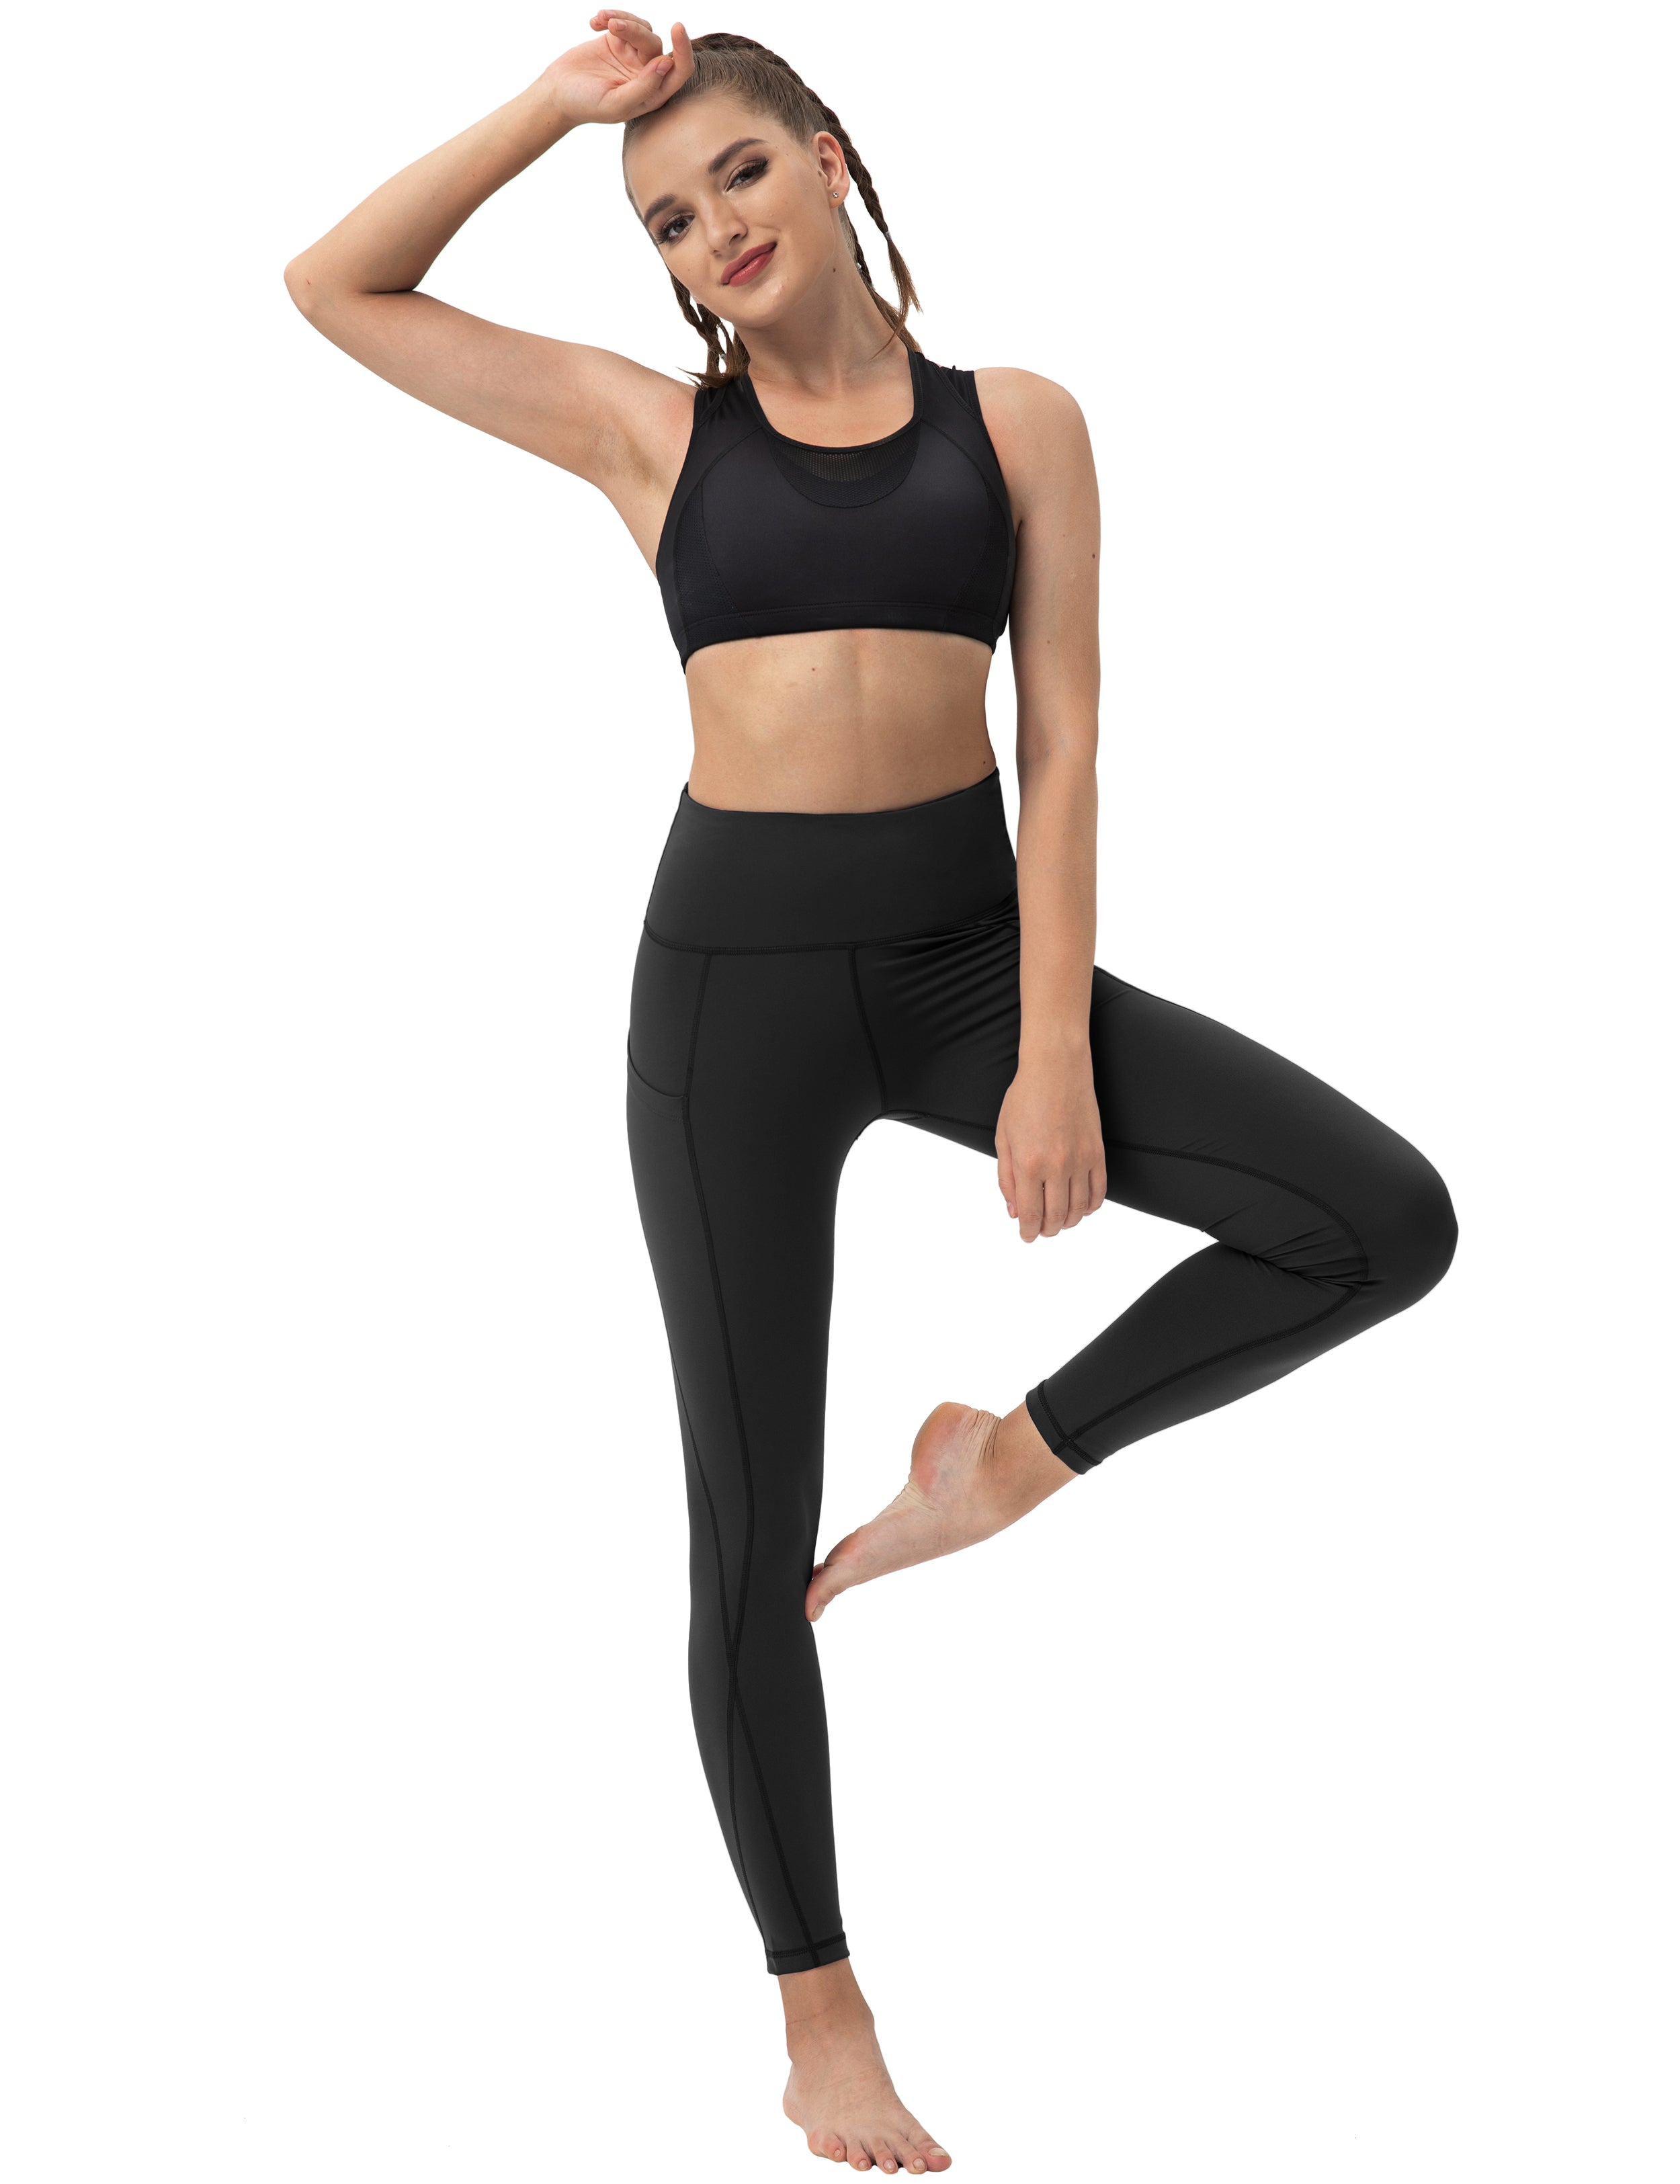 High Waist Side Pockets Running Pants black 75% Nylon, 25% Spandex Fabric doesn't attract lint easily 4-way stretch No see-through Moisture-wicking Tummy control Inner pocket